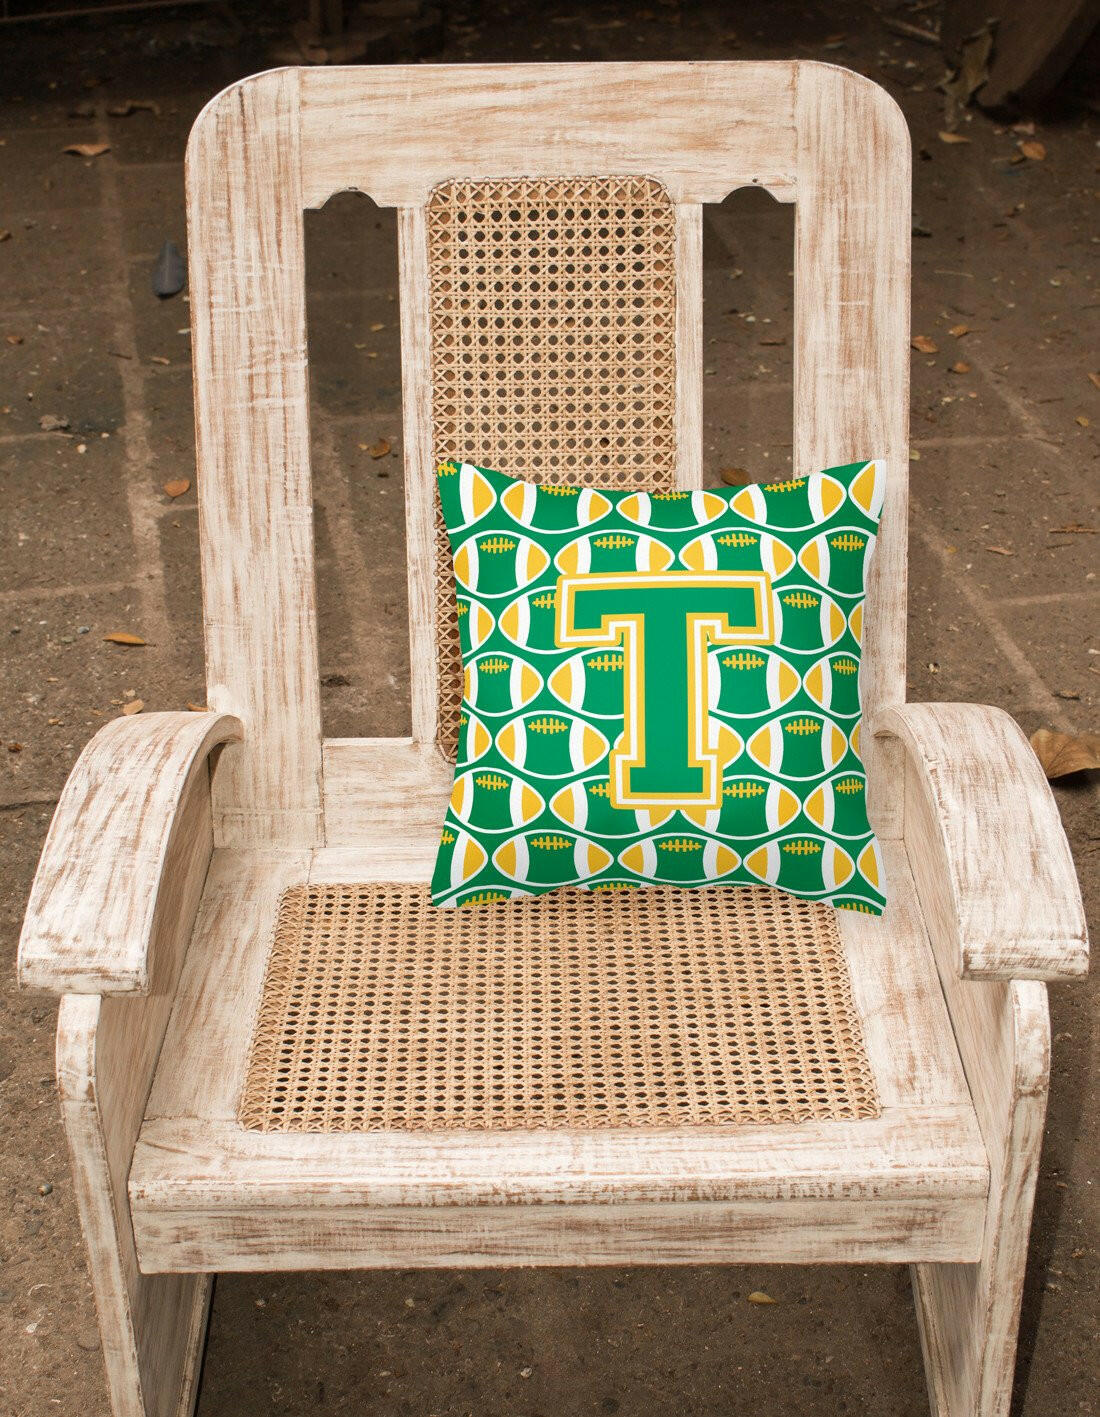 Letter T Football Green and Gold Fabric Decorative Pillow CJ1069-TPW1414 by Caroline's Treasures